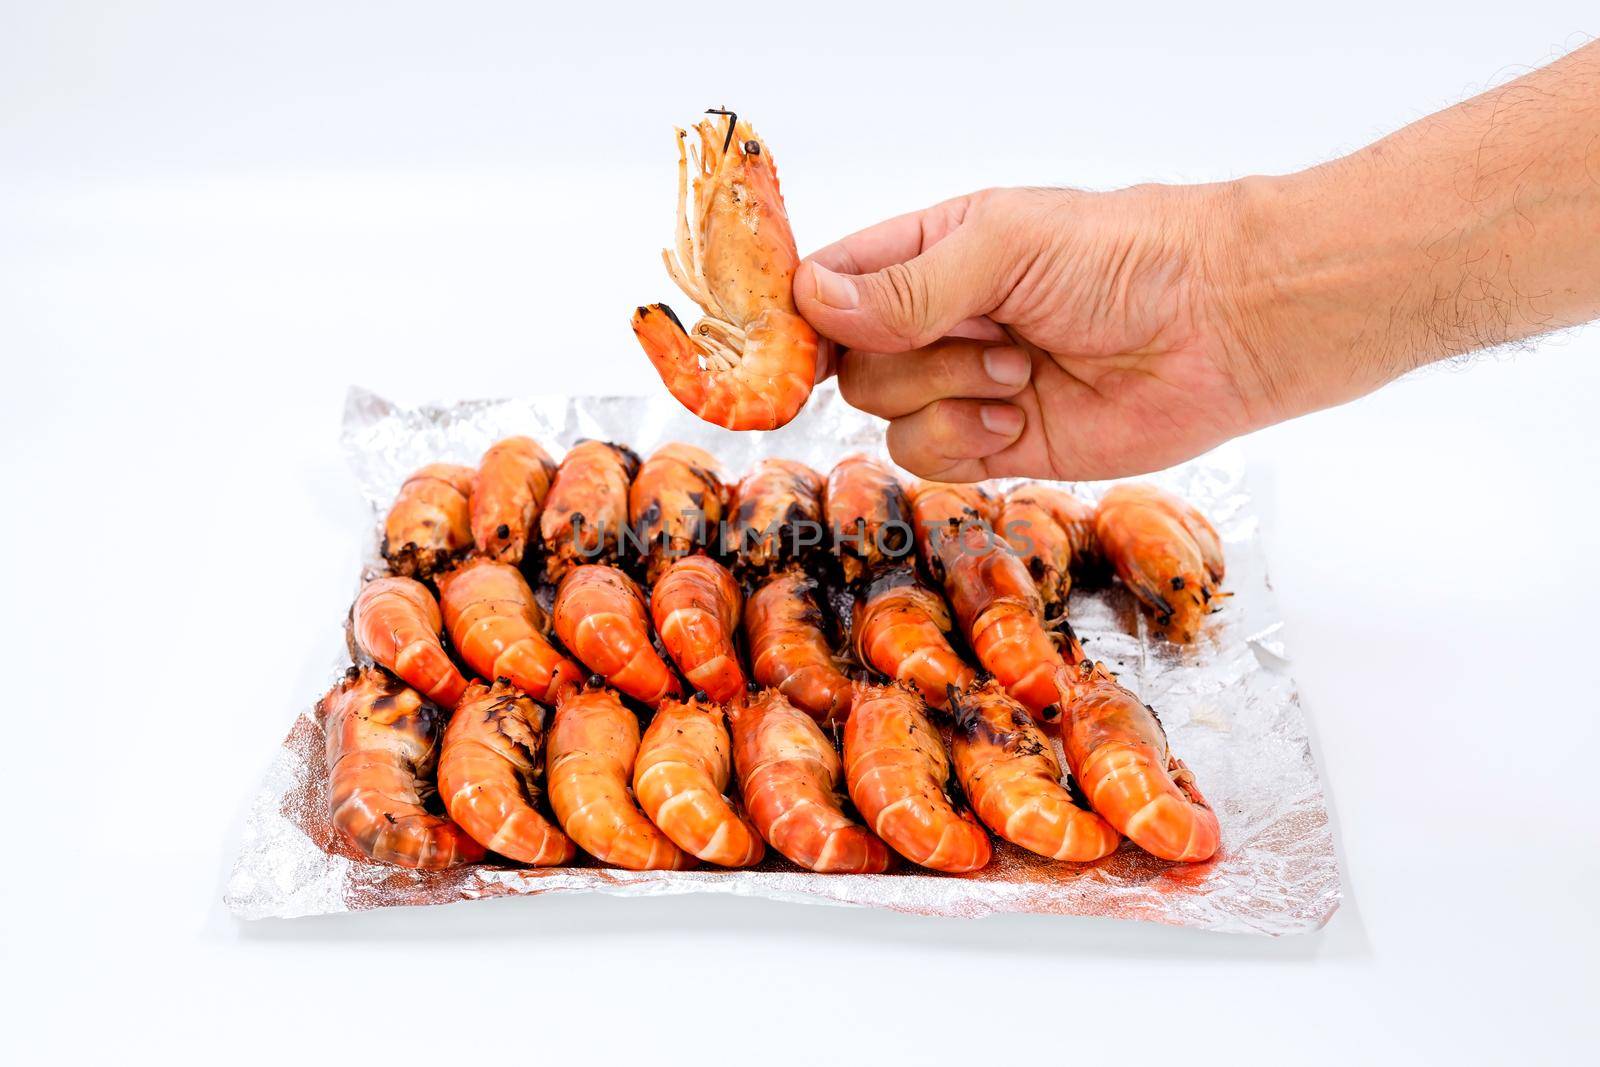 Close up a human hand picks up grilled river prawns from a pile on foil on white background. by wattanaphob